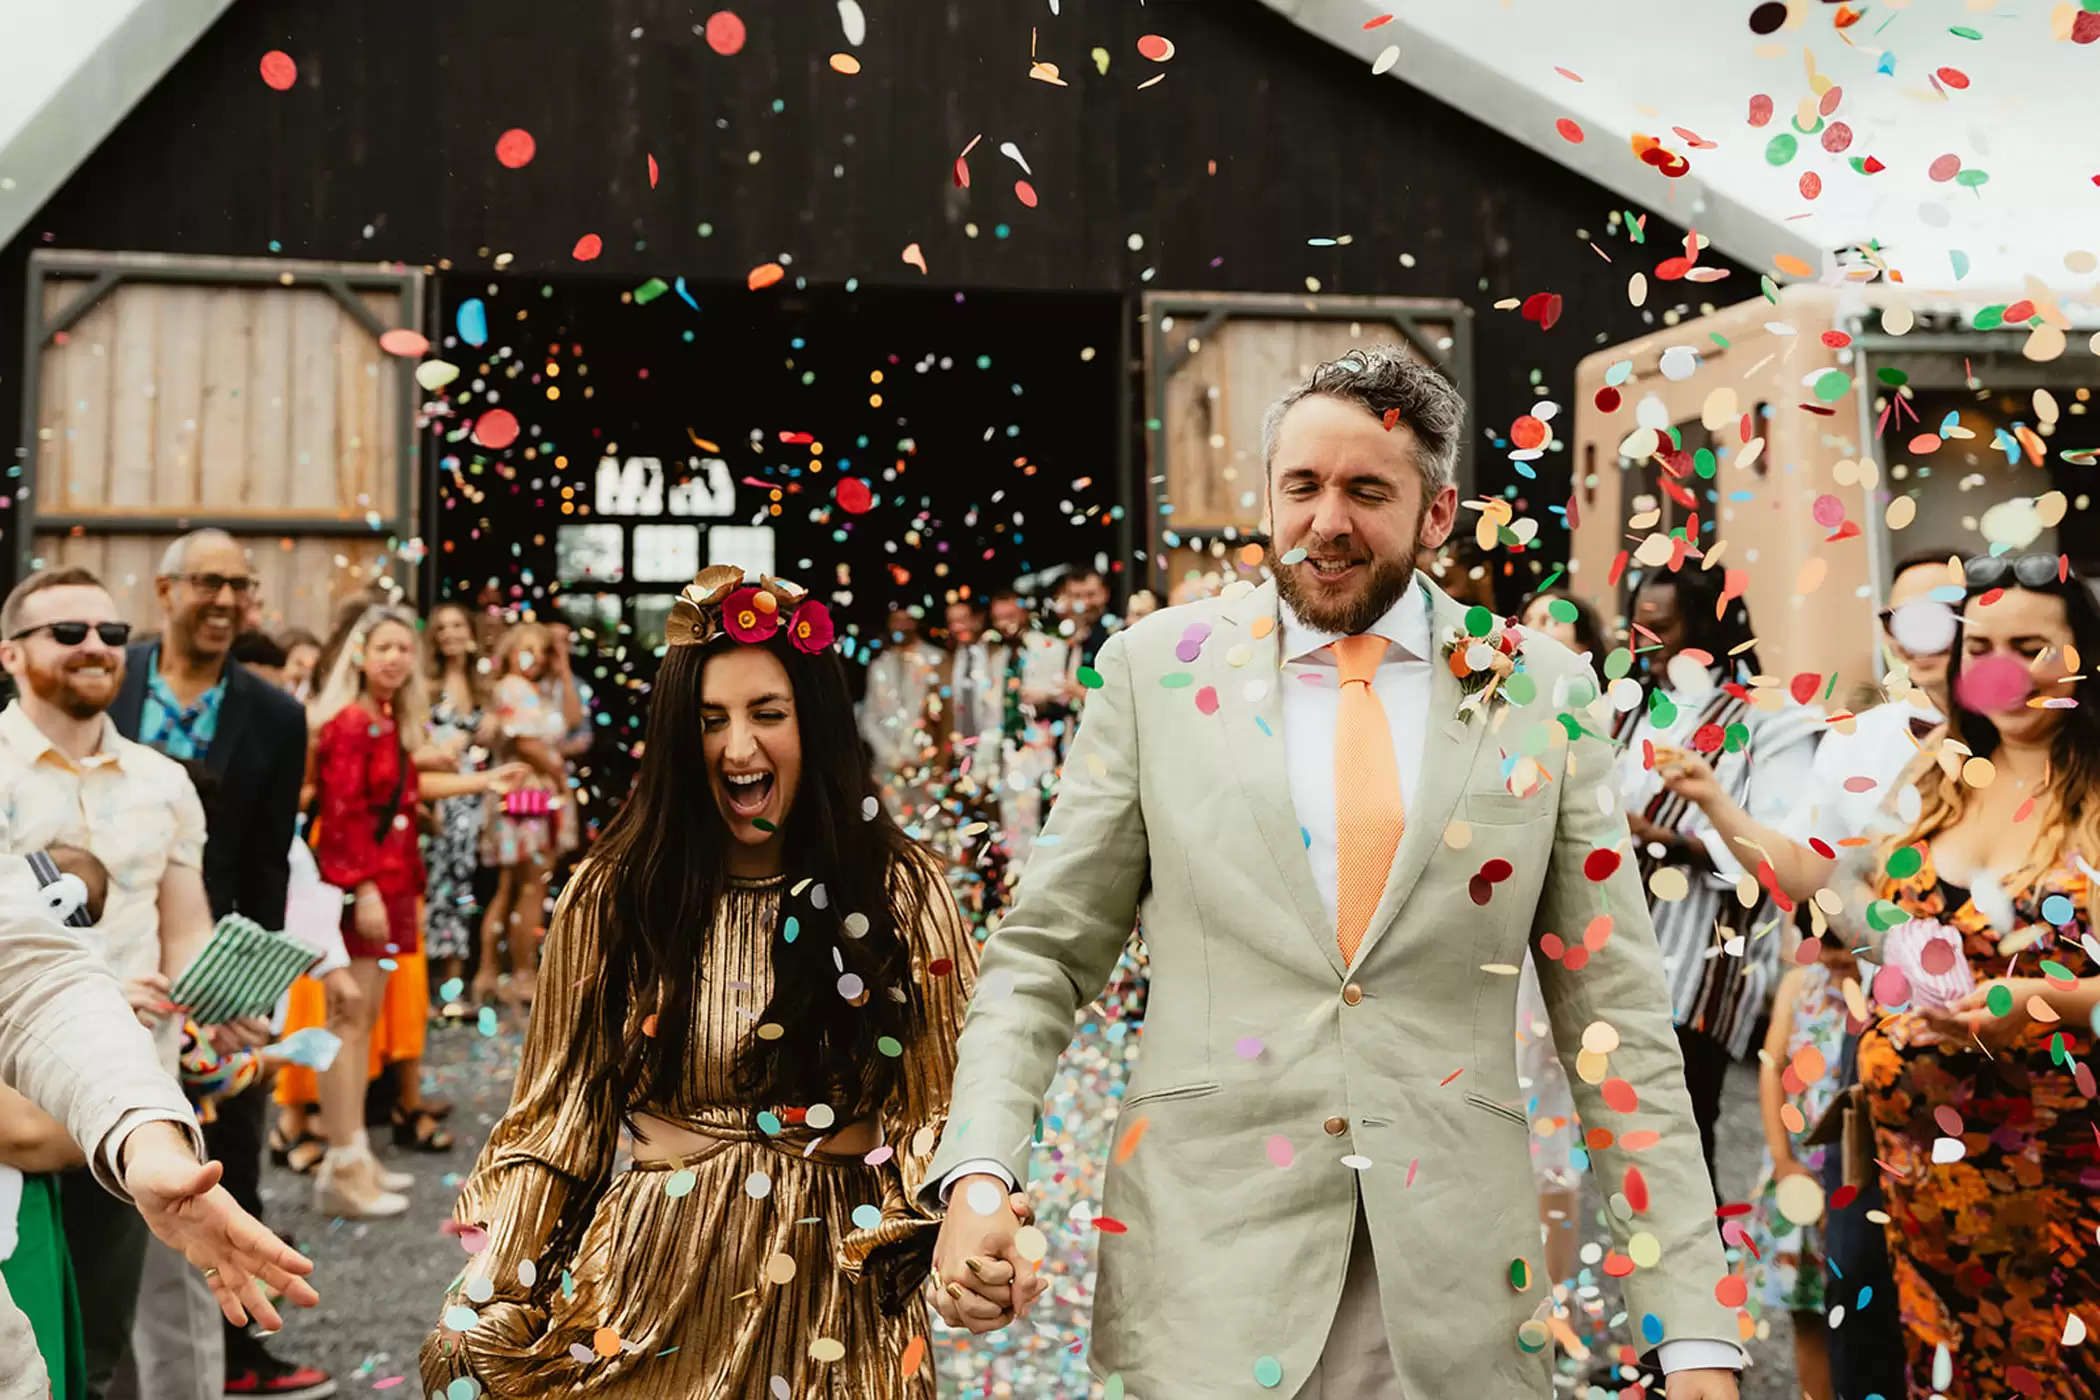 The Bride Wore a Gold Gown for This Vibrant + Distinctive Wedding ceremony in Wales